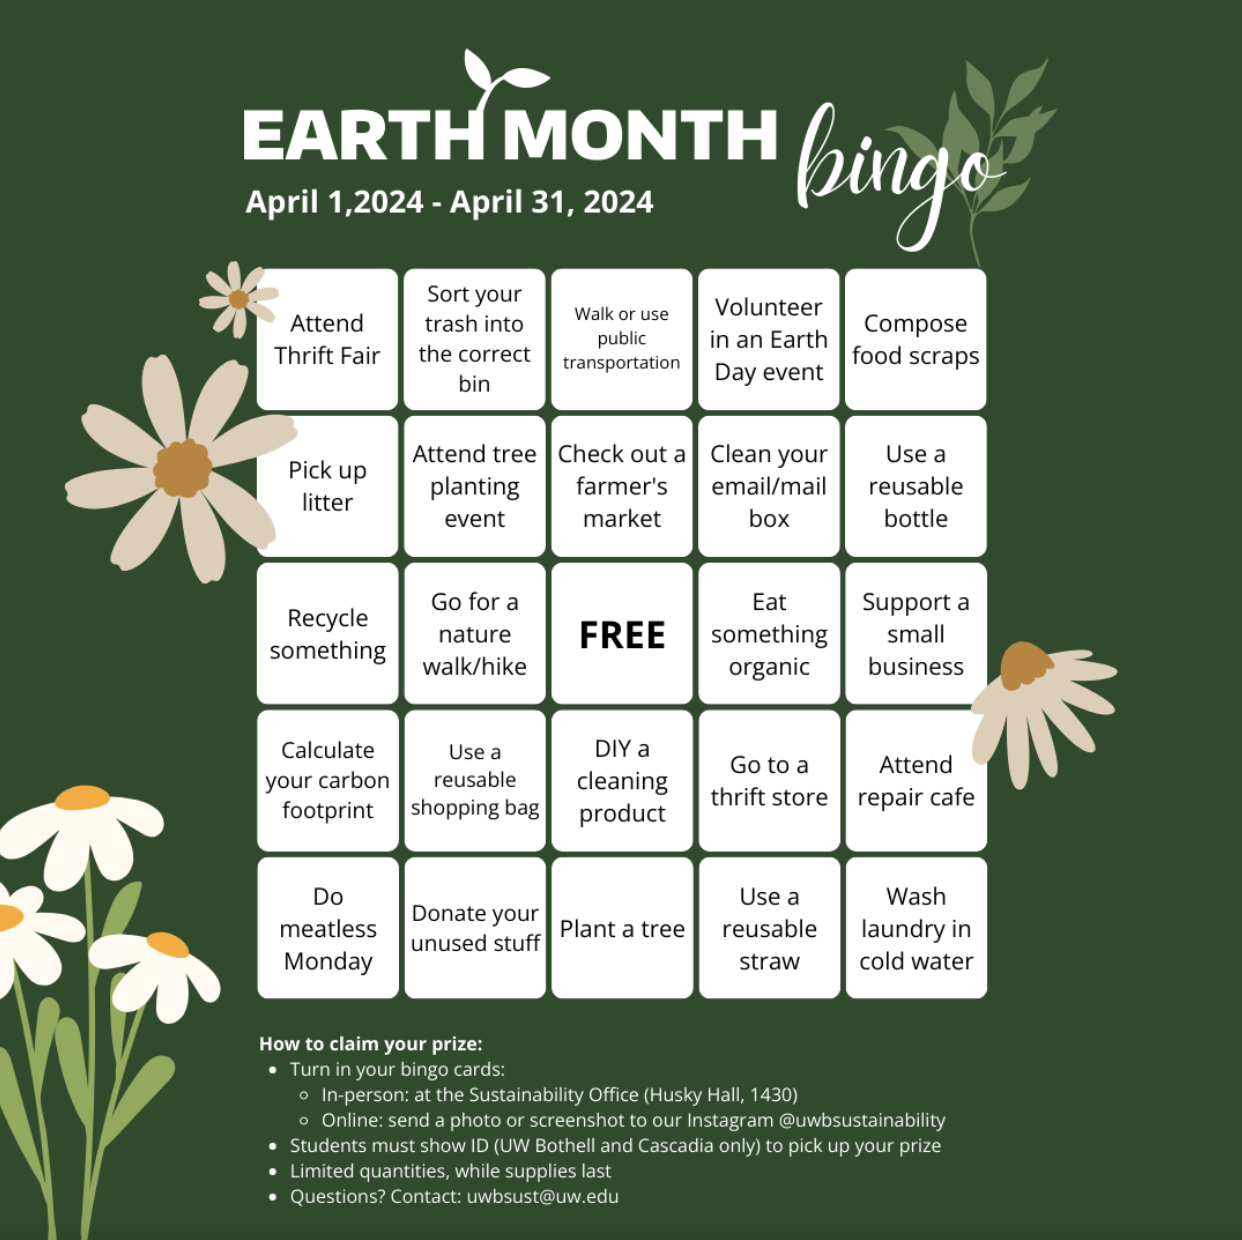 A dark green bingo card featuring various flowers that might be daisies. The bingo card reads Earth month bingo, April 1, 2024 through April 31, 2024.

There are 5 row and 5 columns. 

If you would like an accessible version of this card, please contact uwbweb@uw.edu